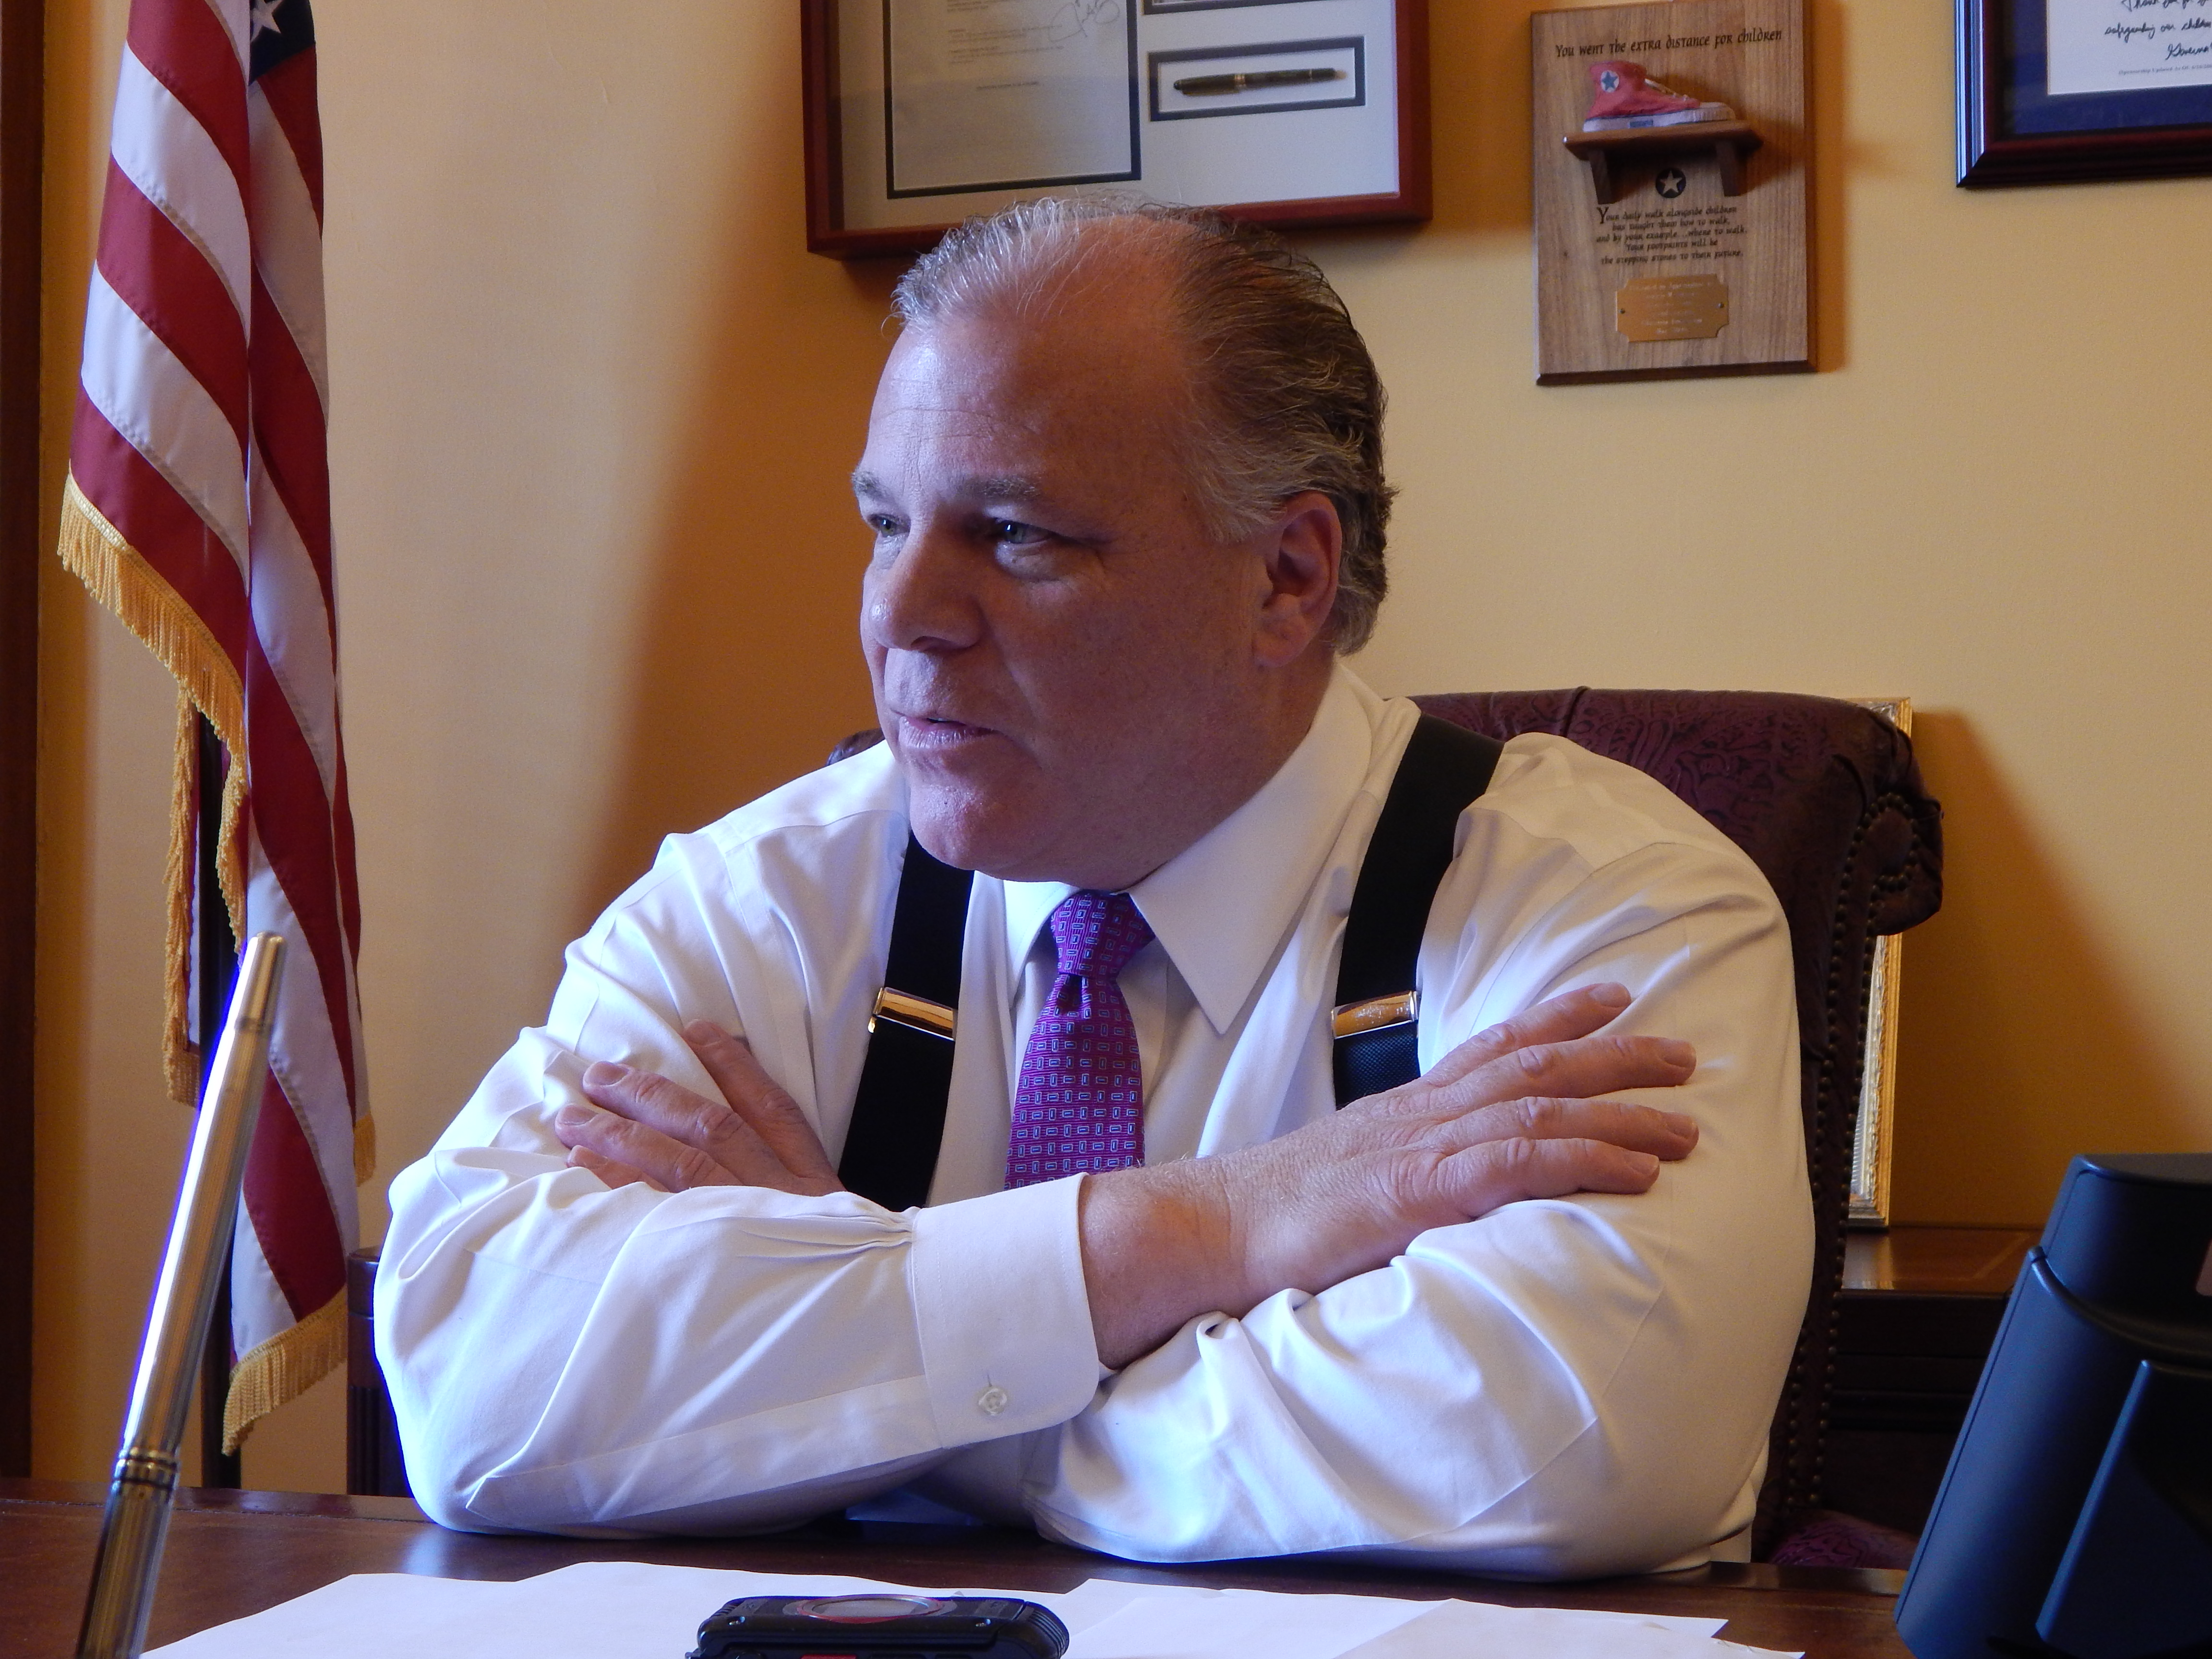 Sweeney in his statehouse office in Trenton.